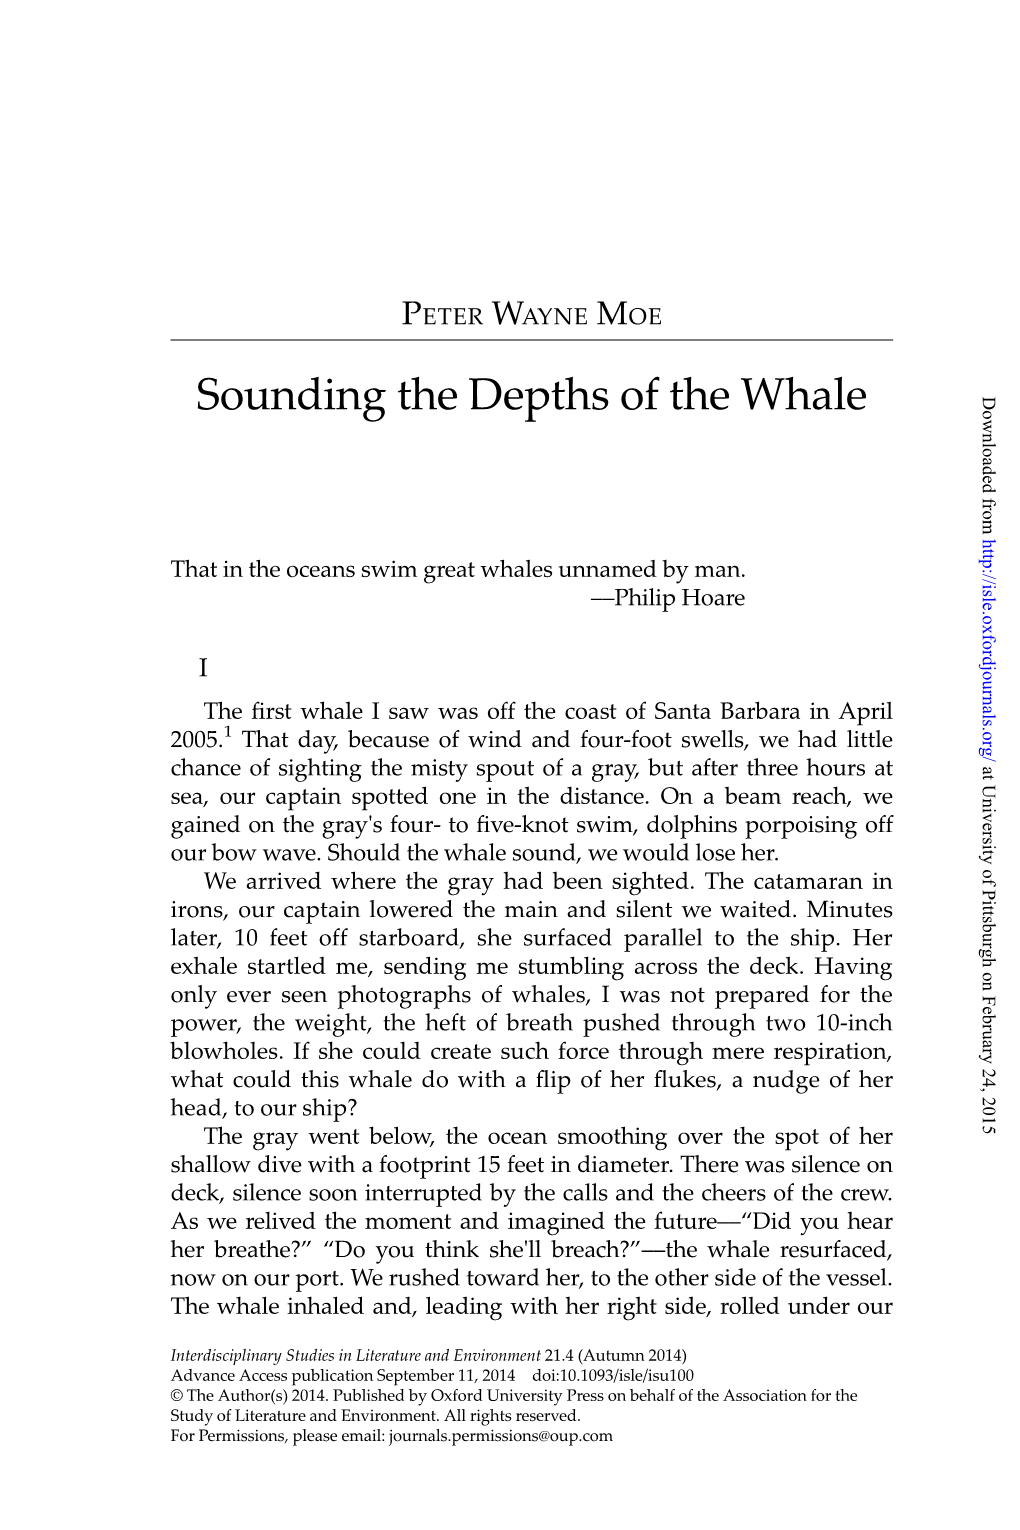 Sounding the Depths of the Whale Downloaded from That in the Oceans Swim Great Whales Unnamed by Man